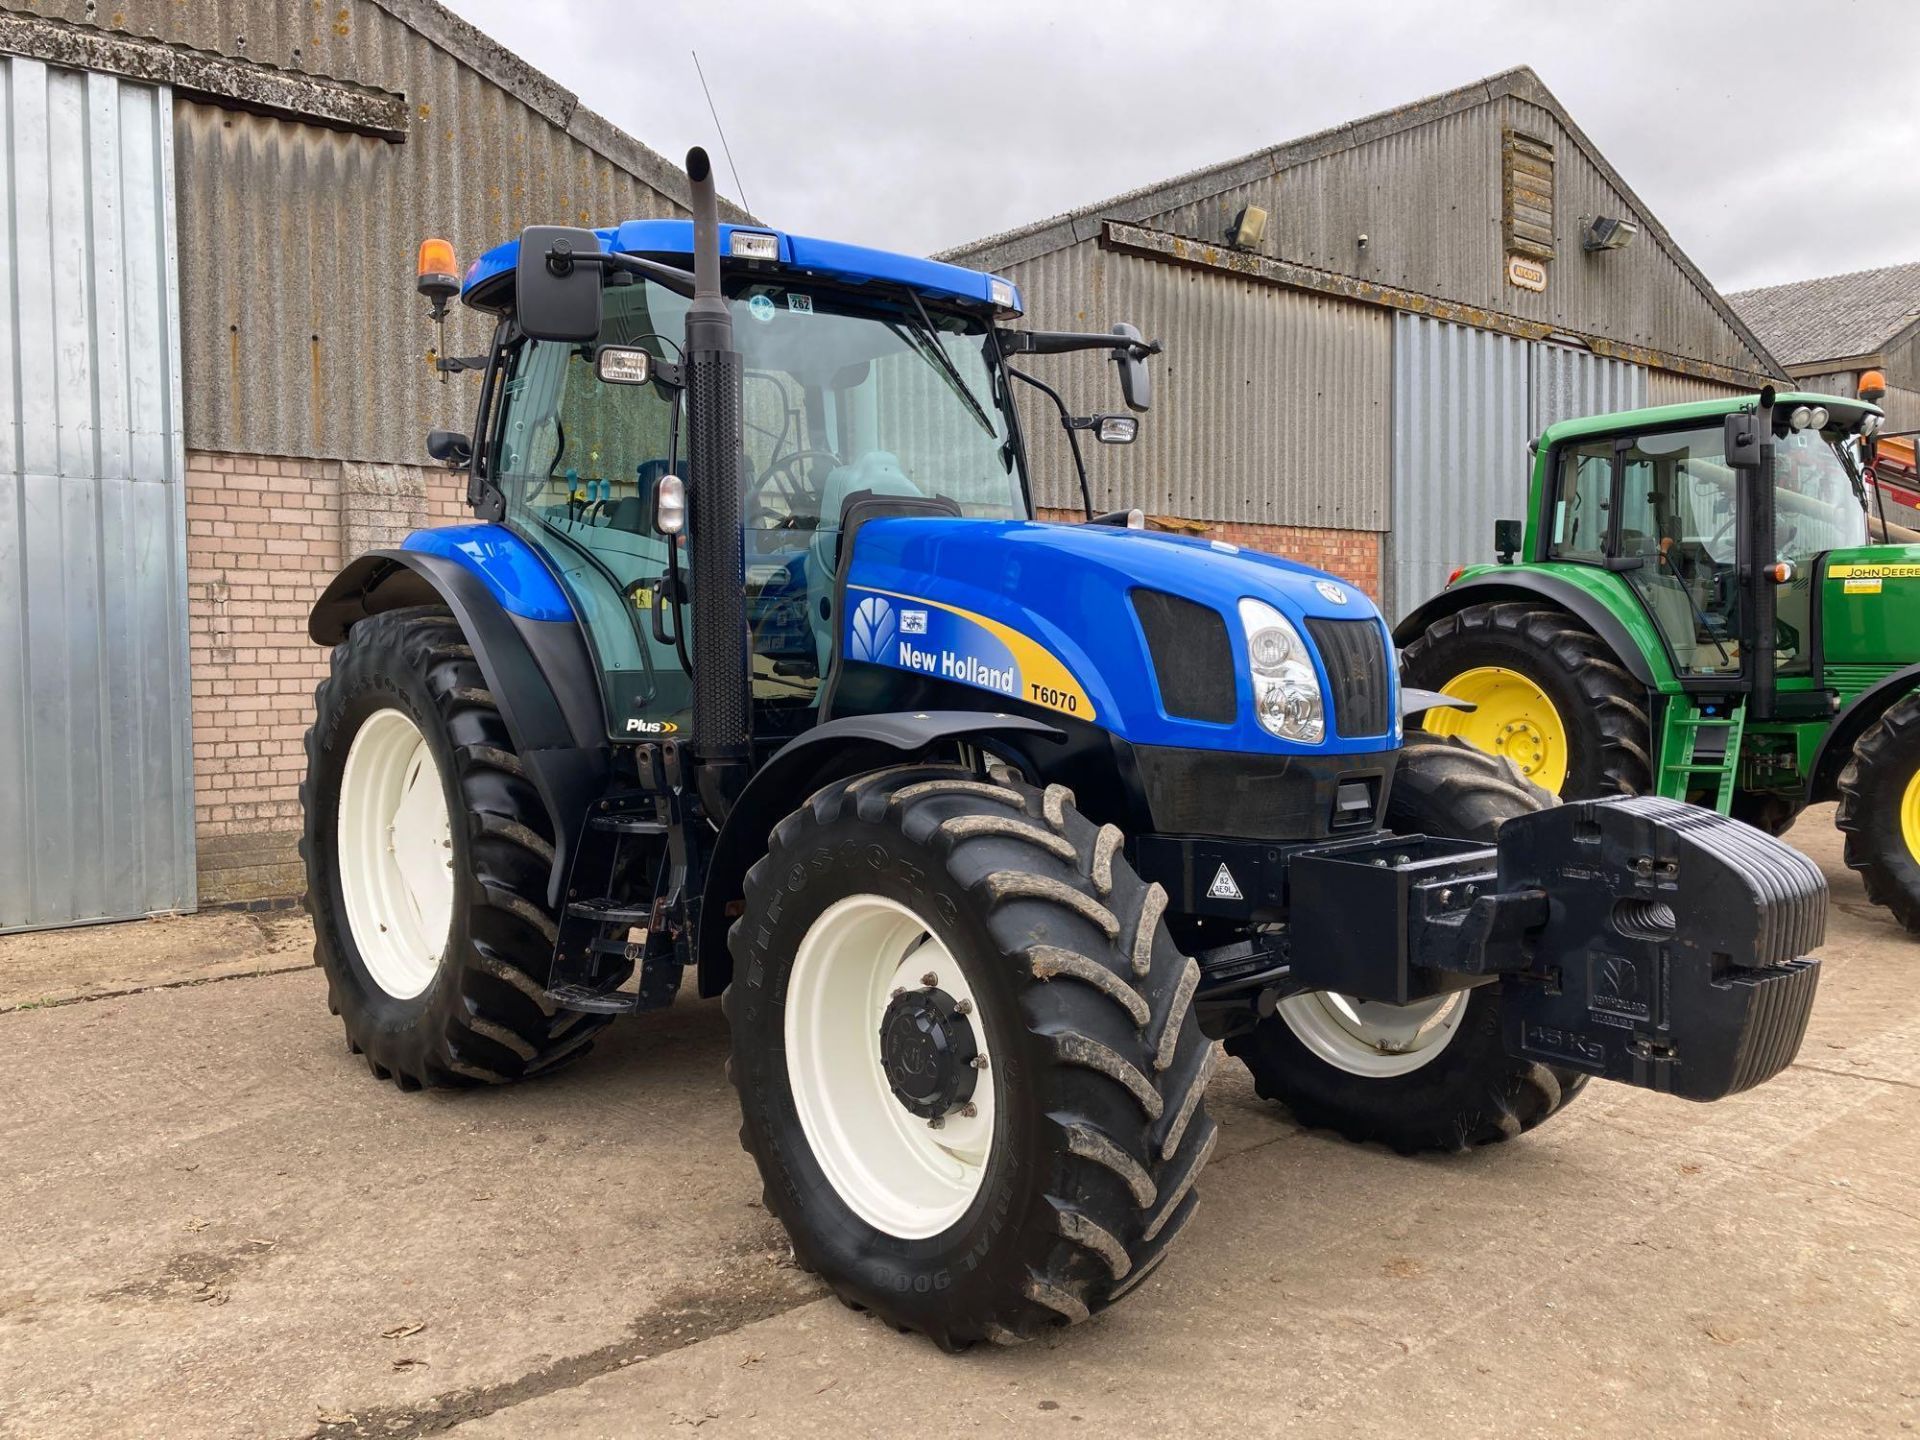 2010 New Holland T6070 tractor, 40kph, 16 speed, electroshift, with 3 rear spools, front axle and ca - Image 10 of 33